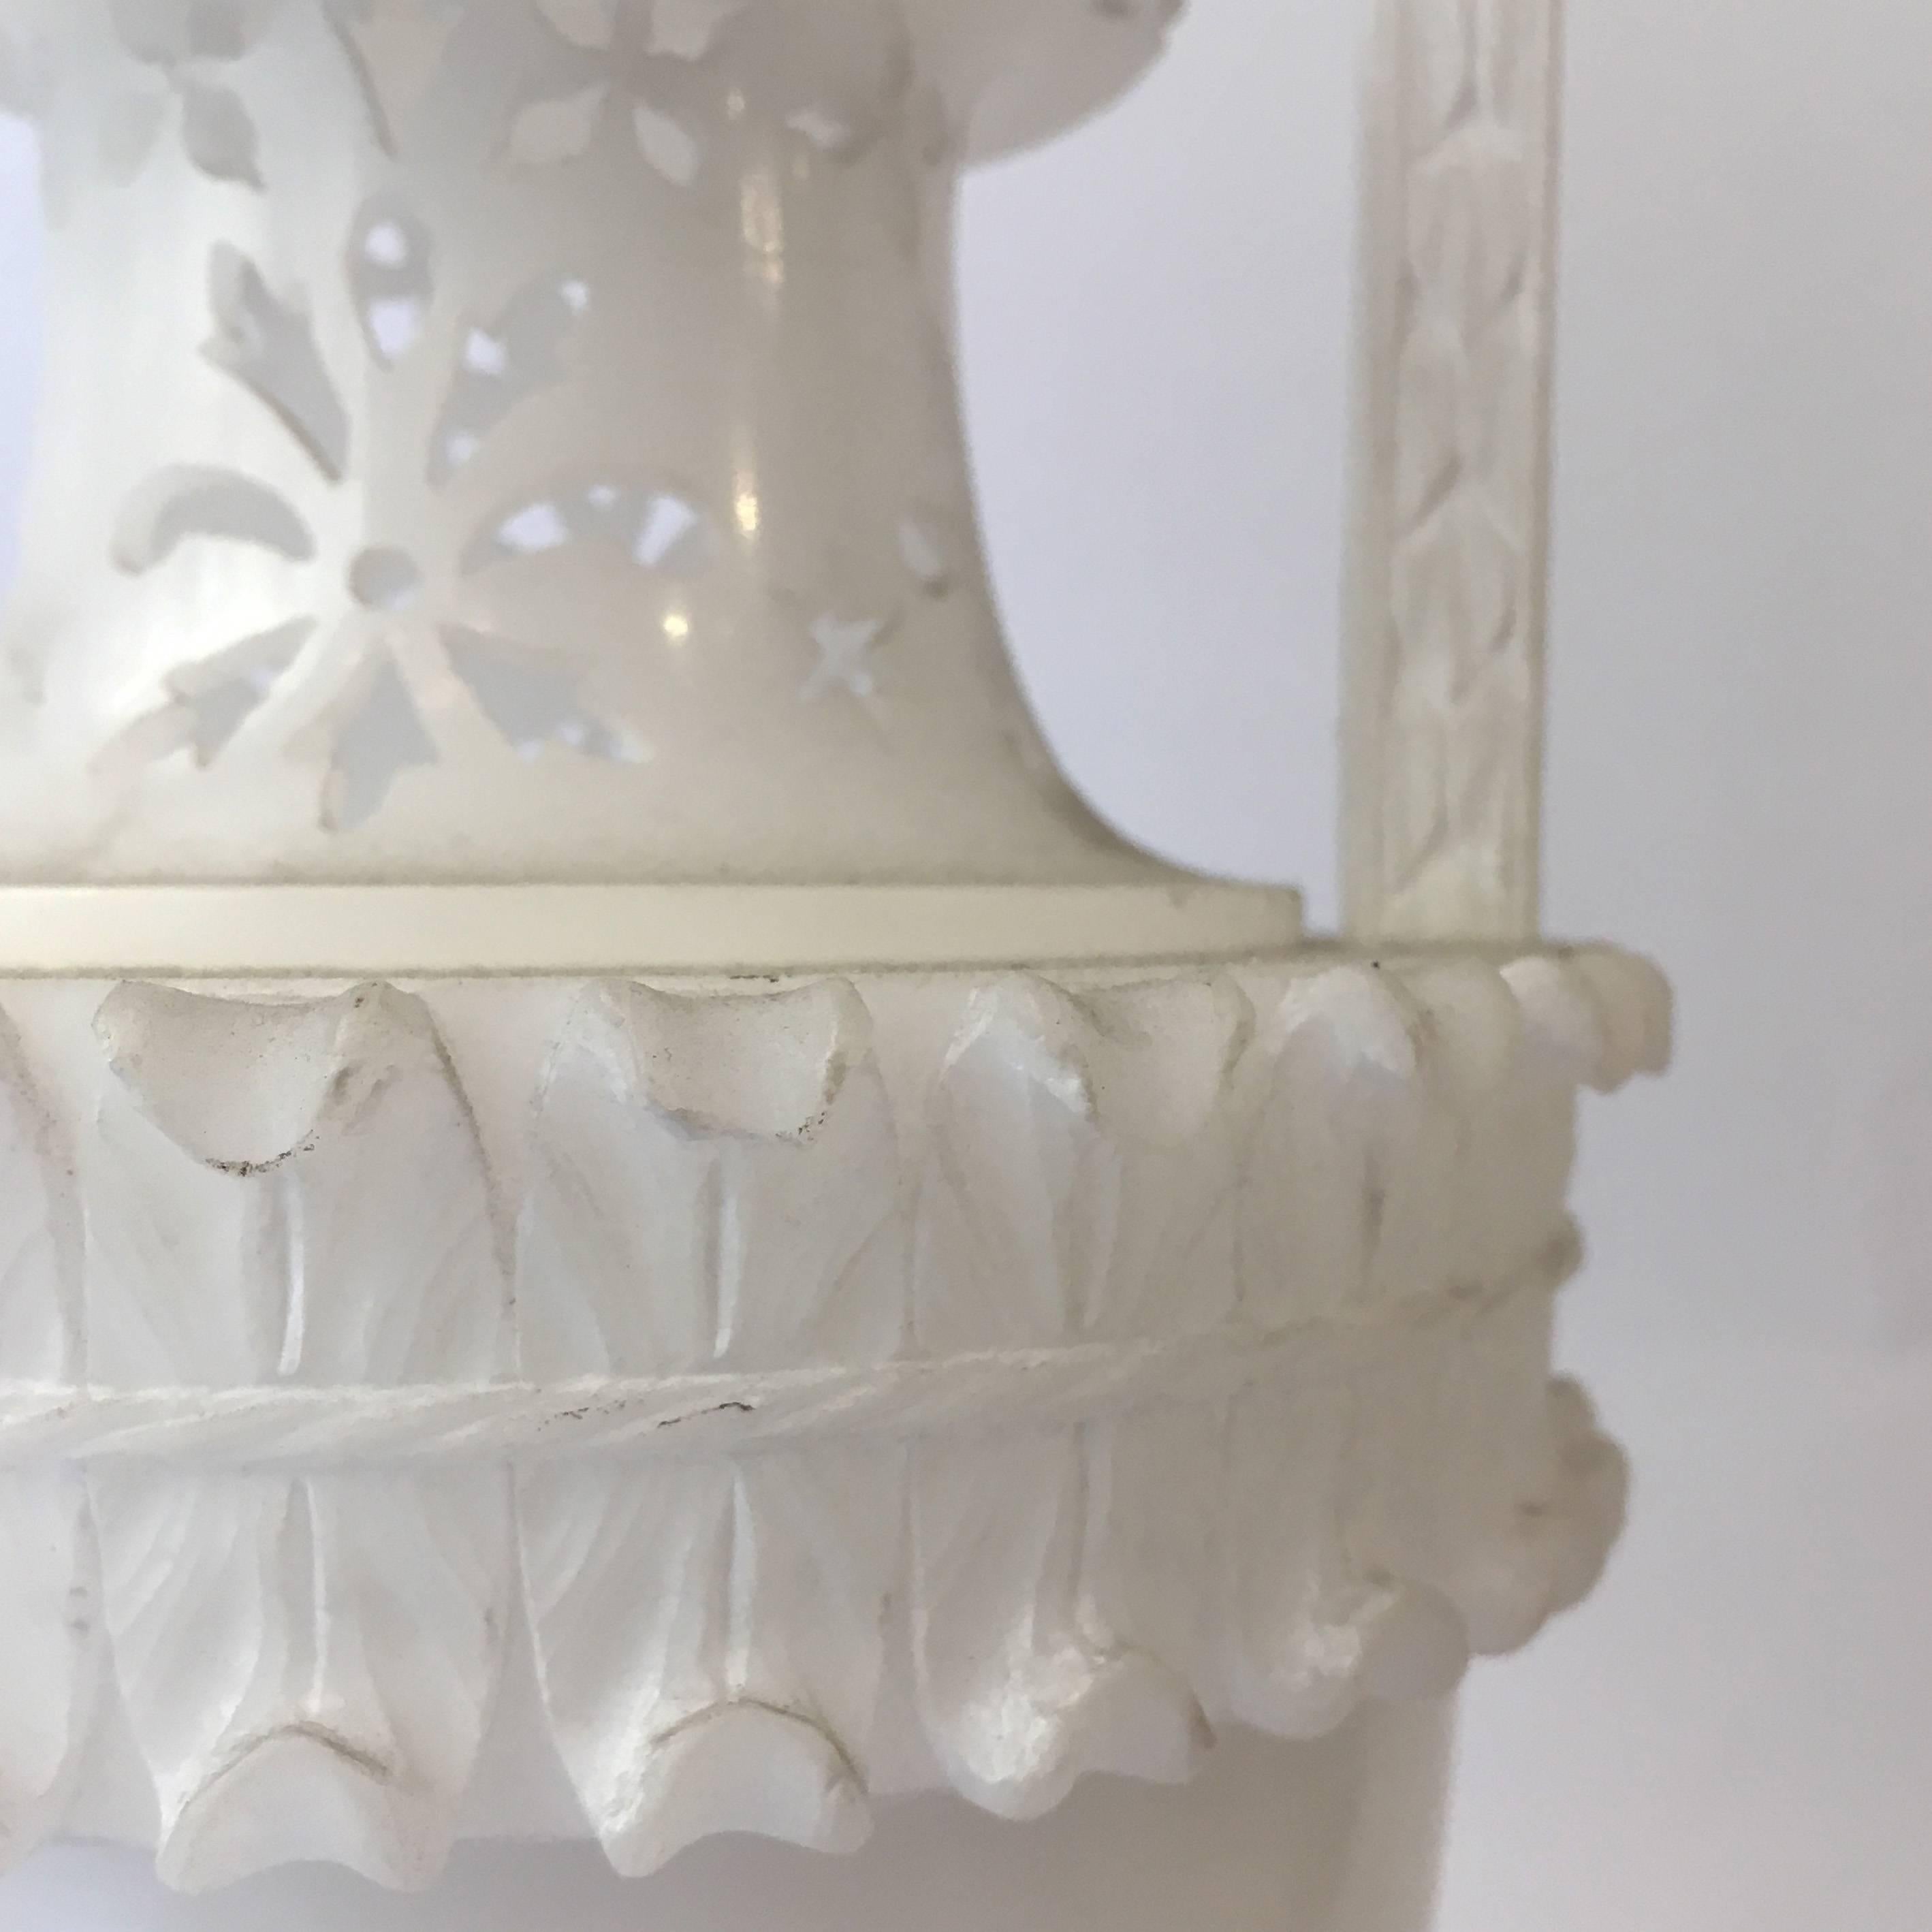 19th Century Italian Pair of Hand-Carved Neoclassical Alabaster Vases or Urns For Sale 2